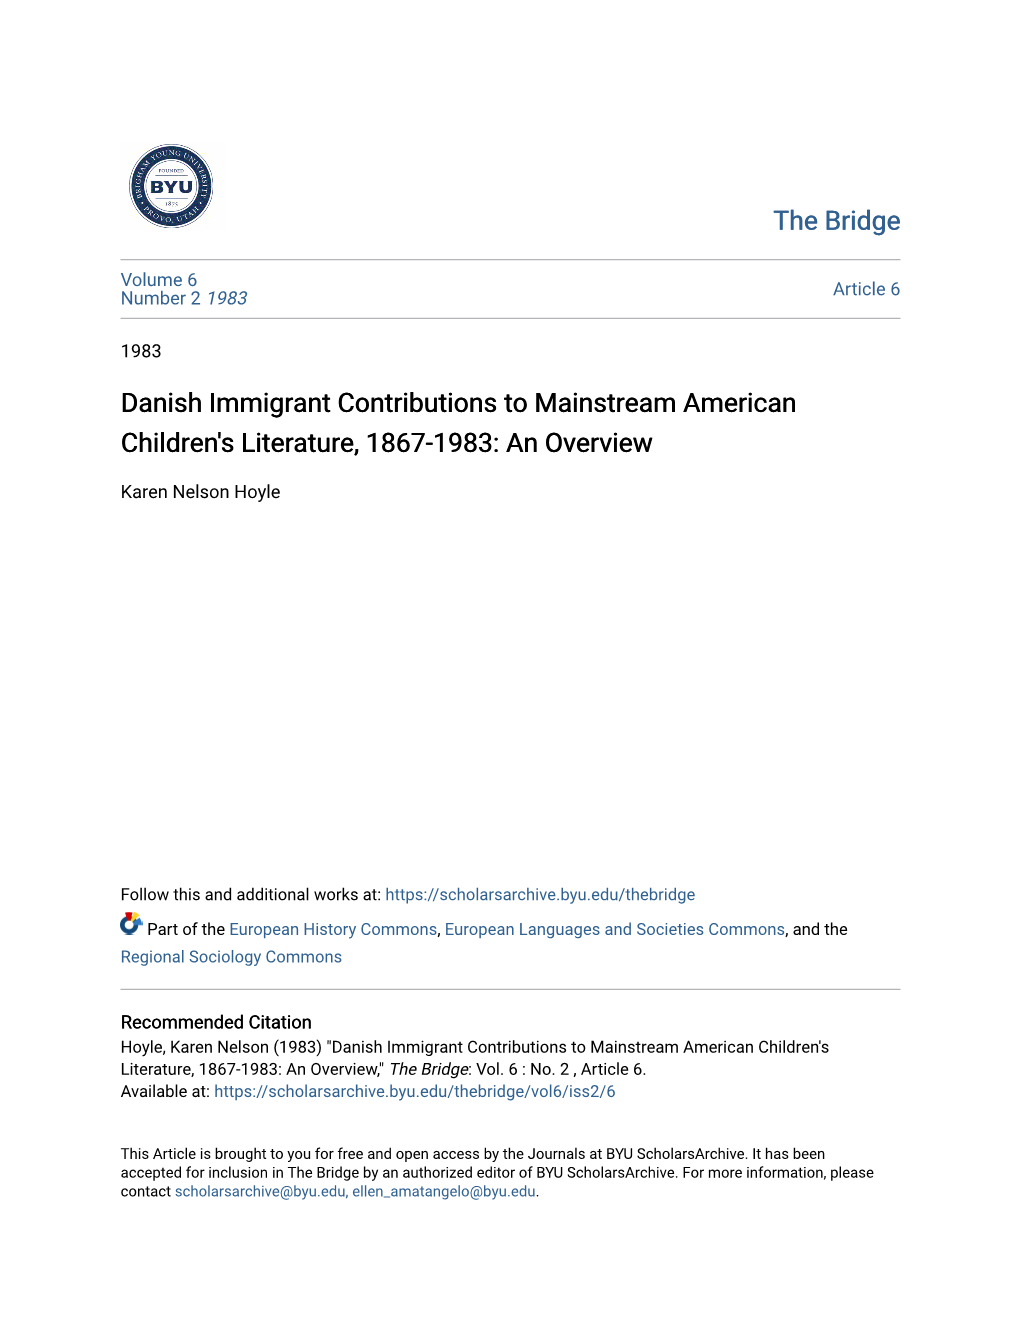 Danish Immigrant Contributions to Mainstream American Children's Literature, 1867-1983: an Overview